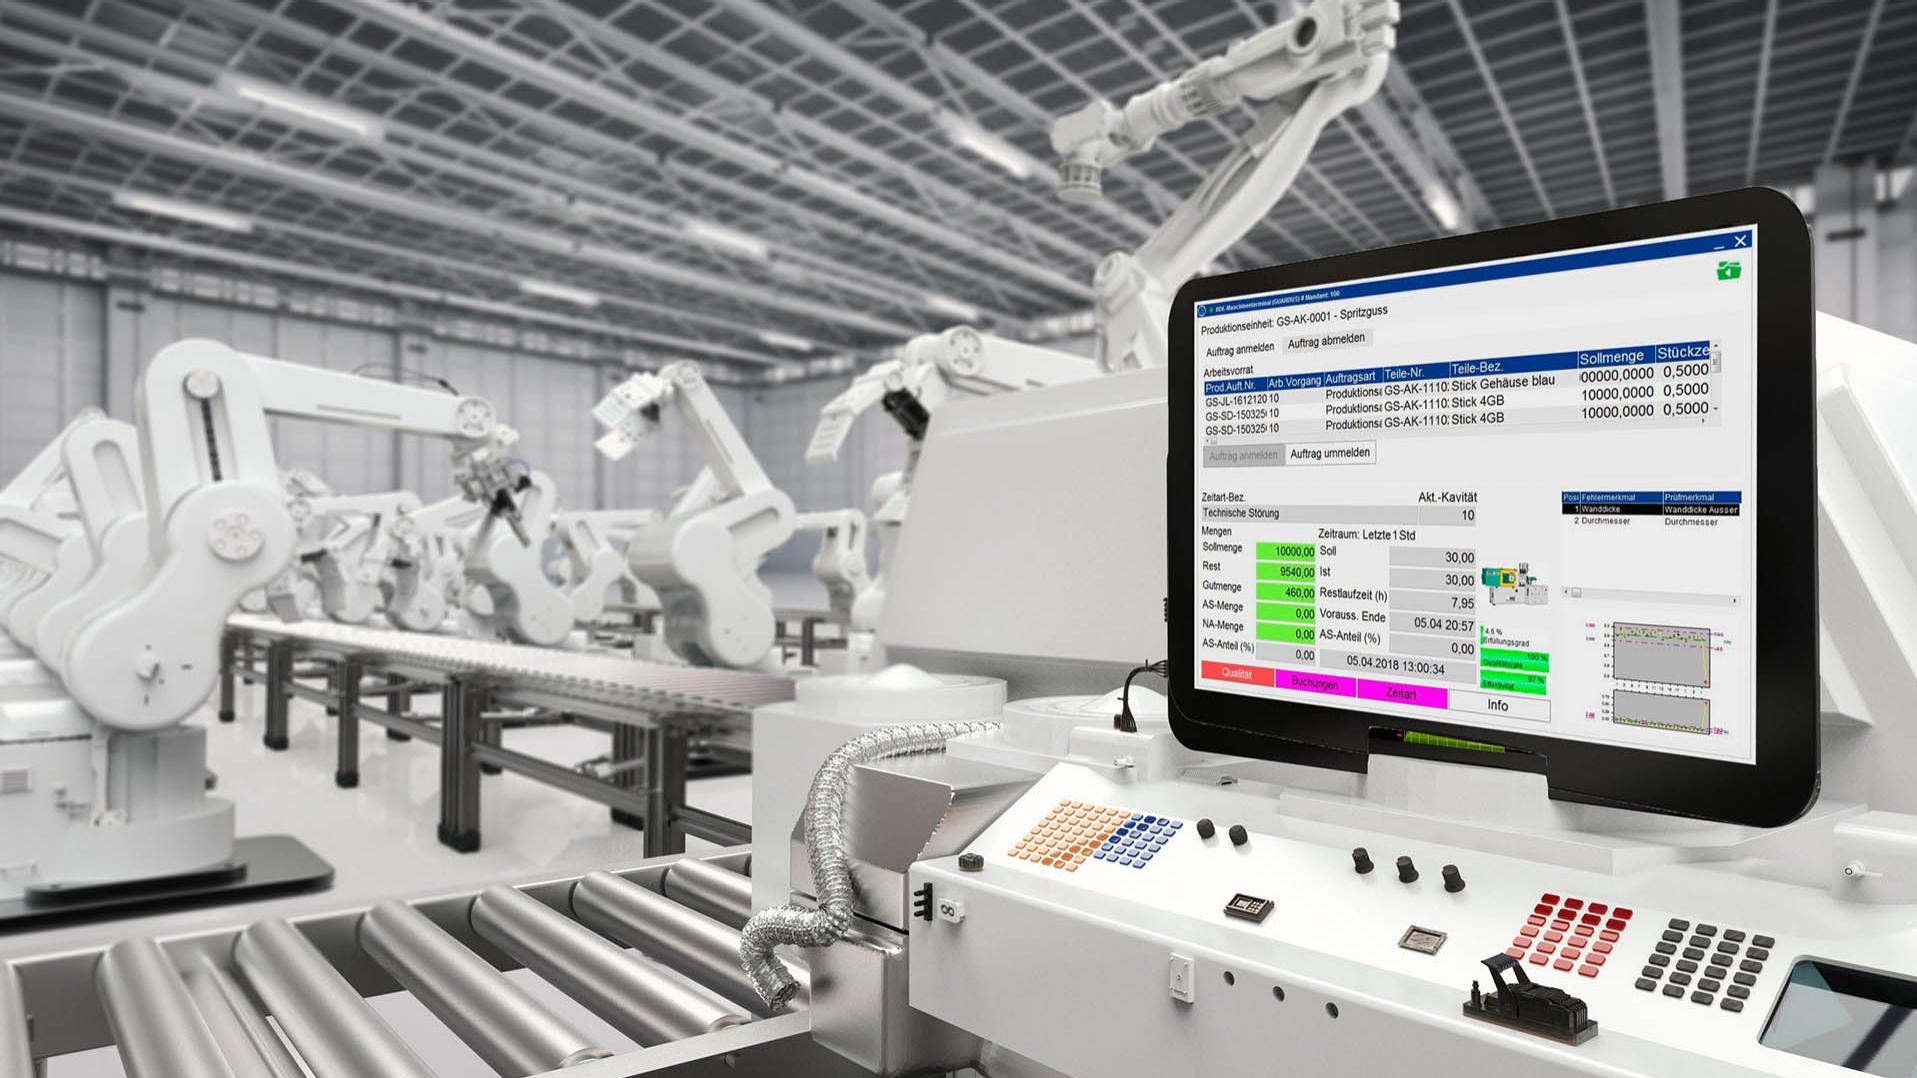 The software solutions from GUARDUS provide decision intelligence for managing Smart Factories.